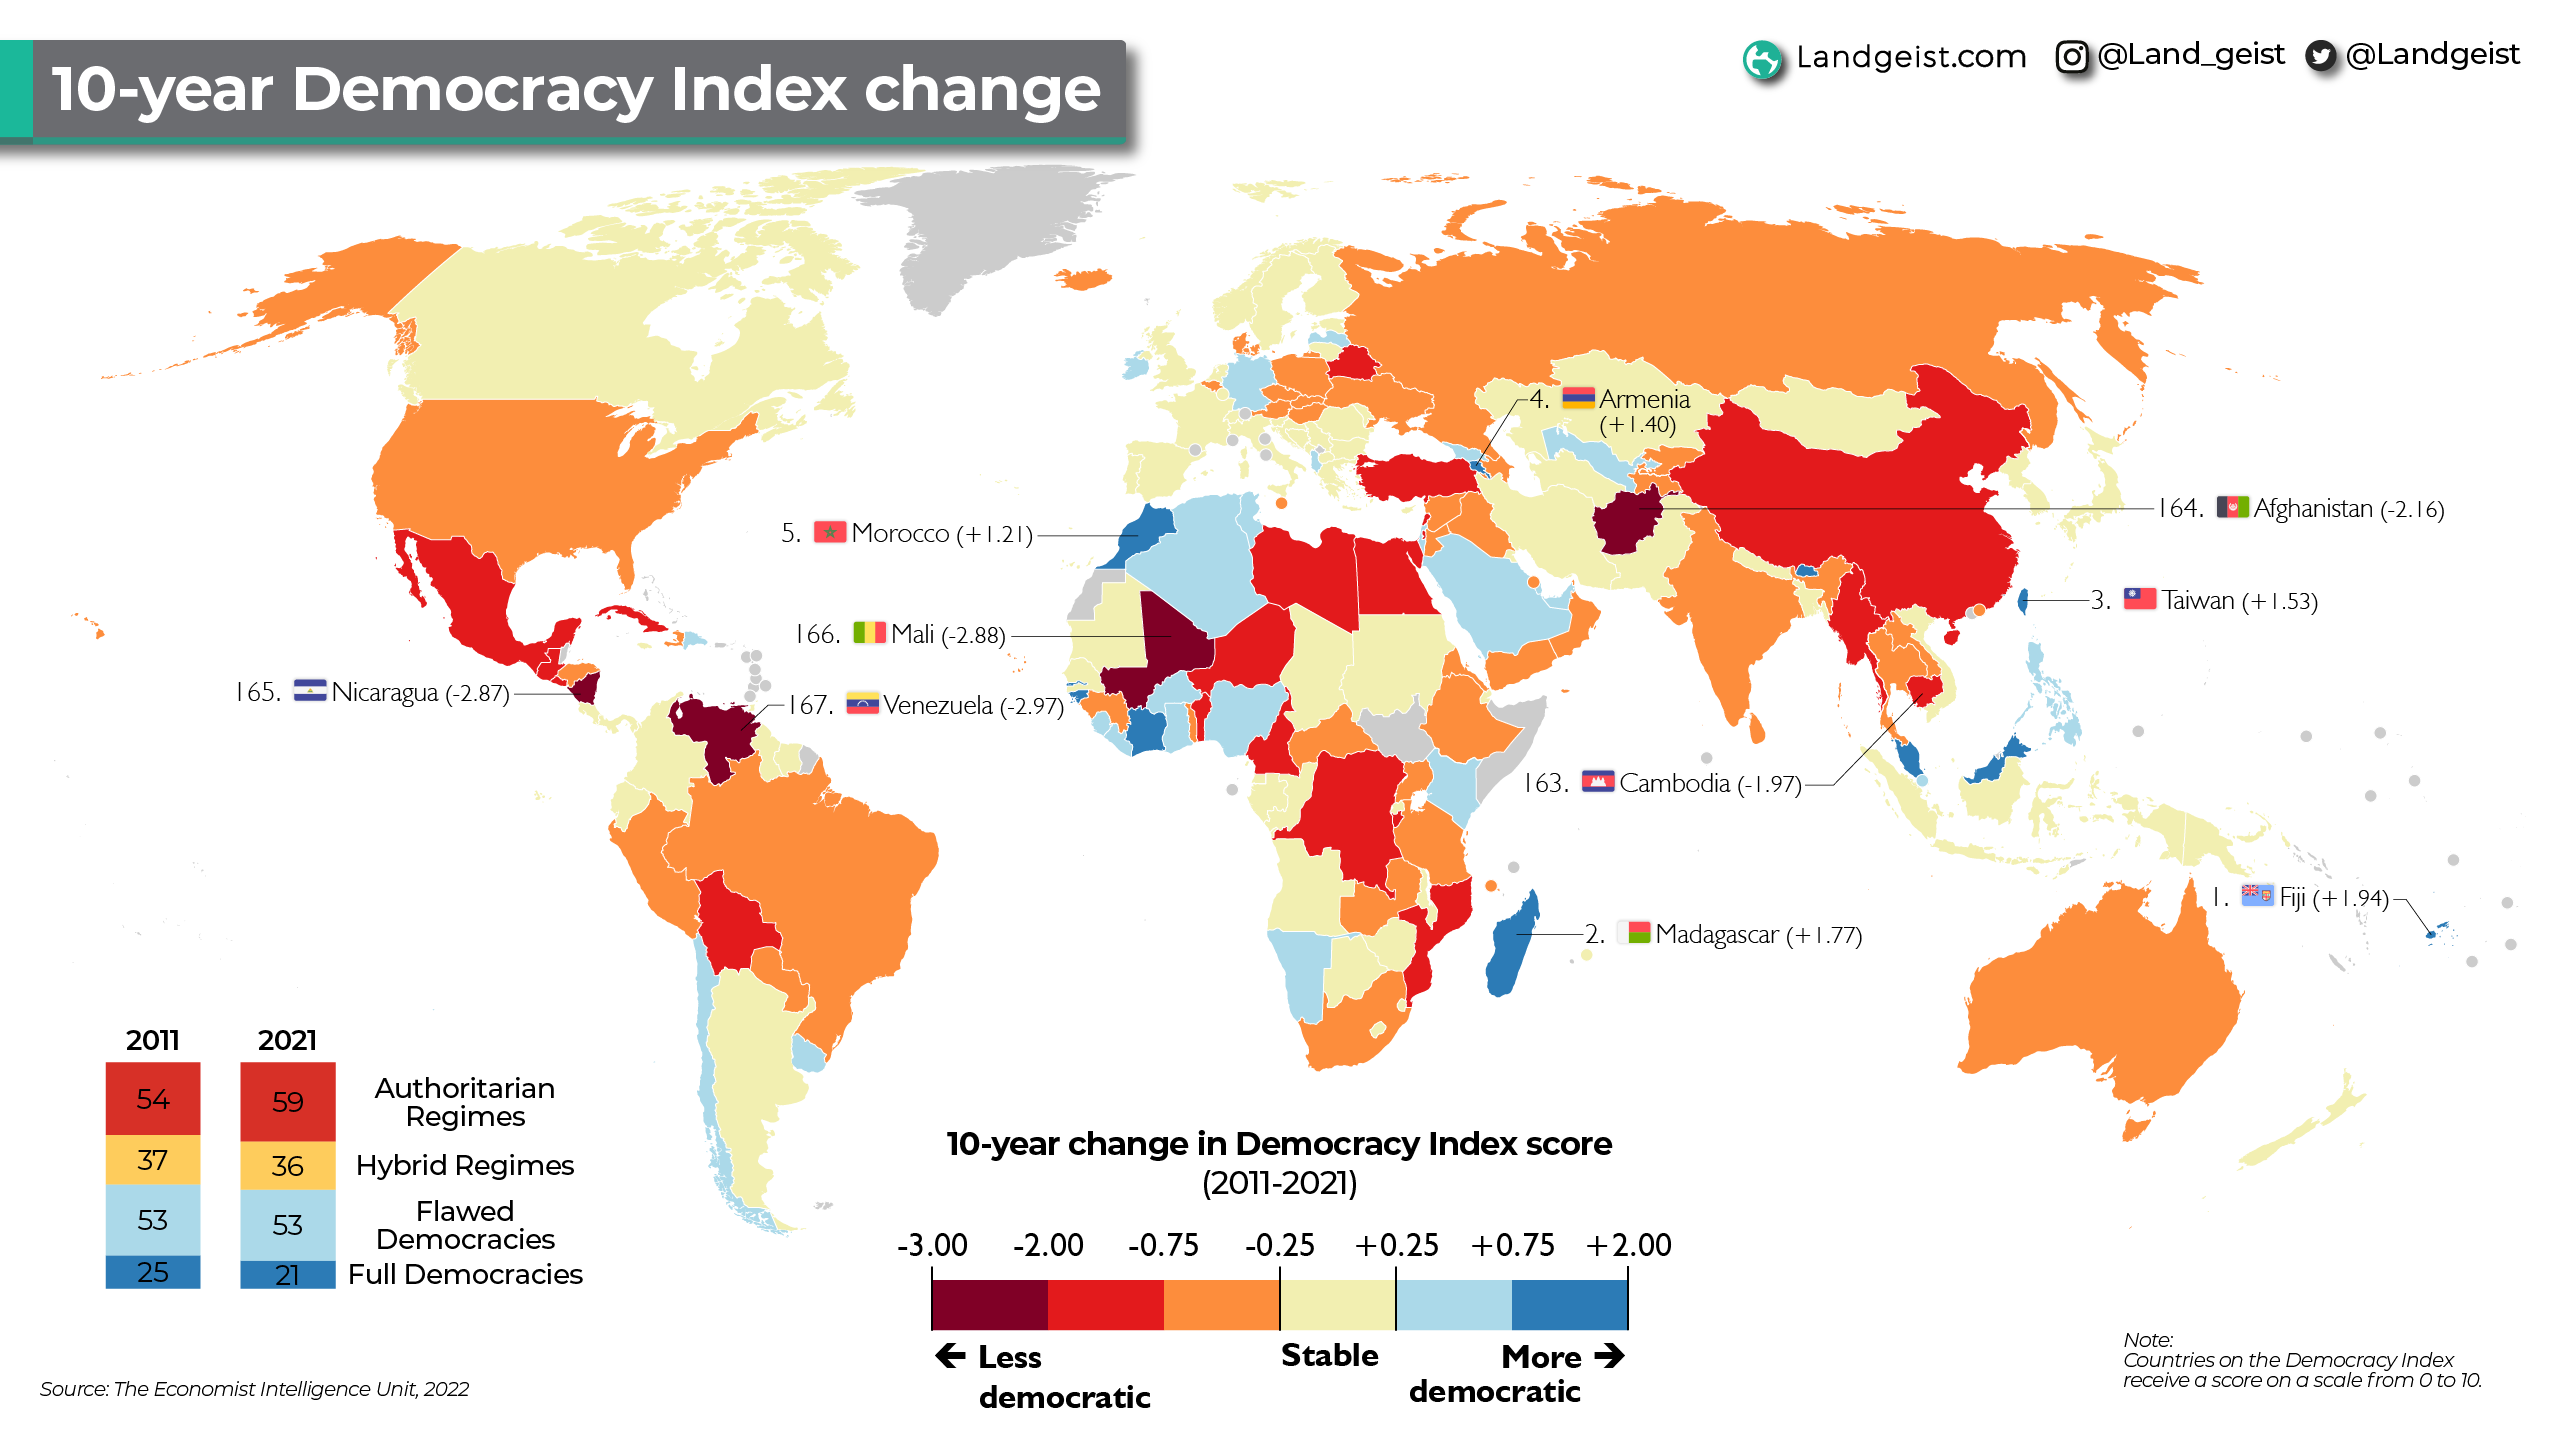 World map of the 10-year change in Democracy Index score.